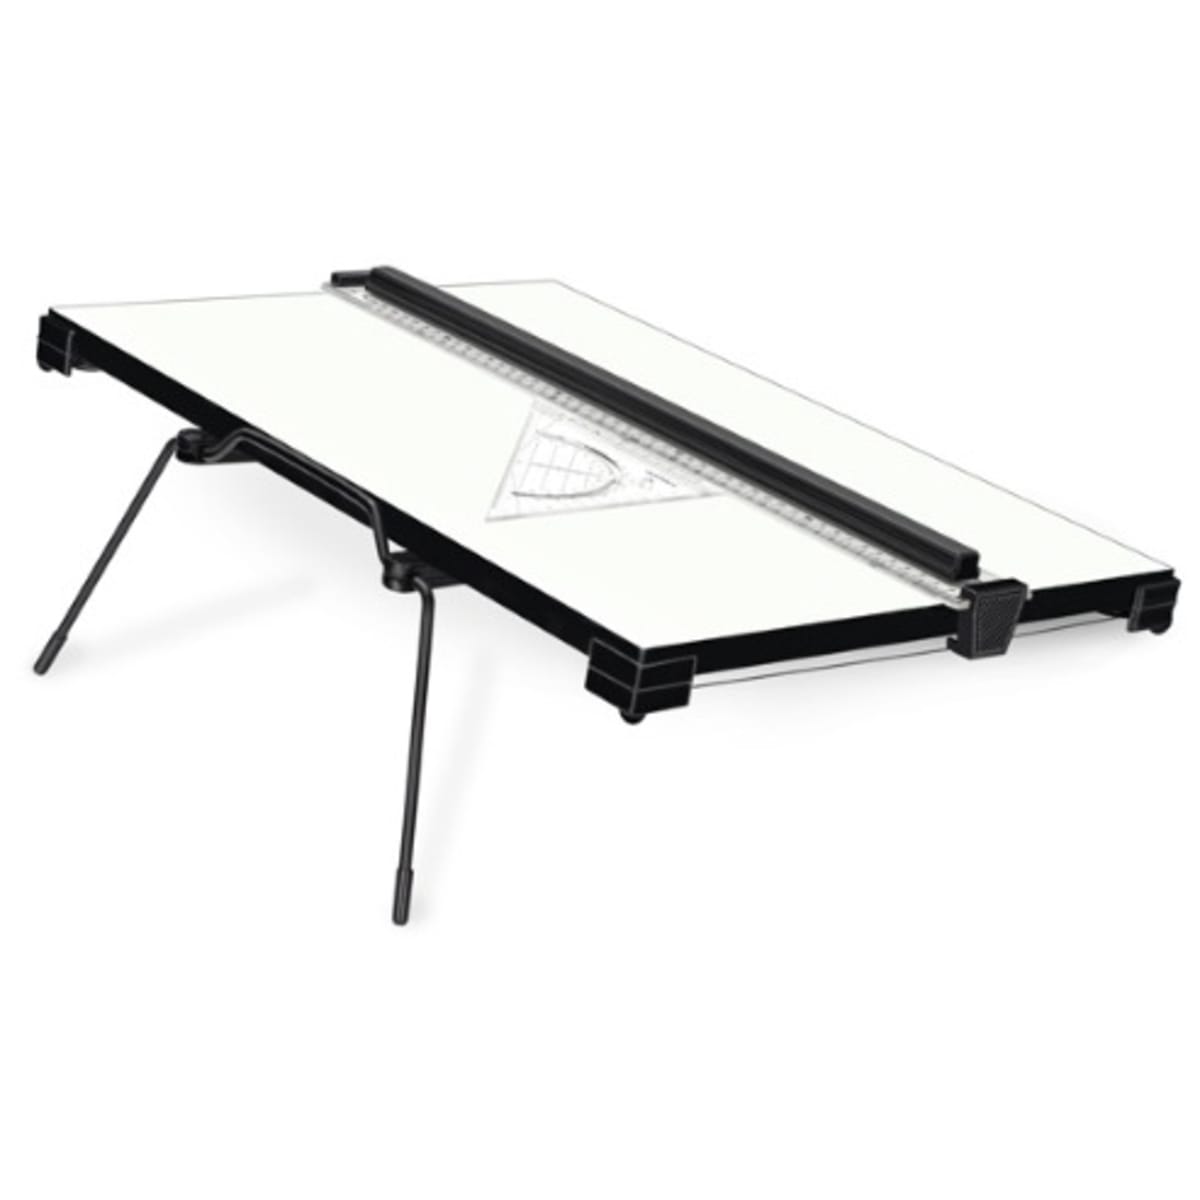 A2 Technical Drawing Board With Parallel Motion